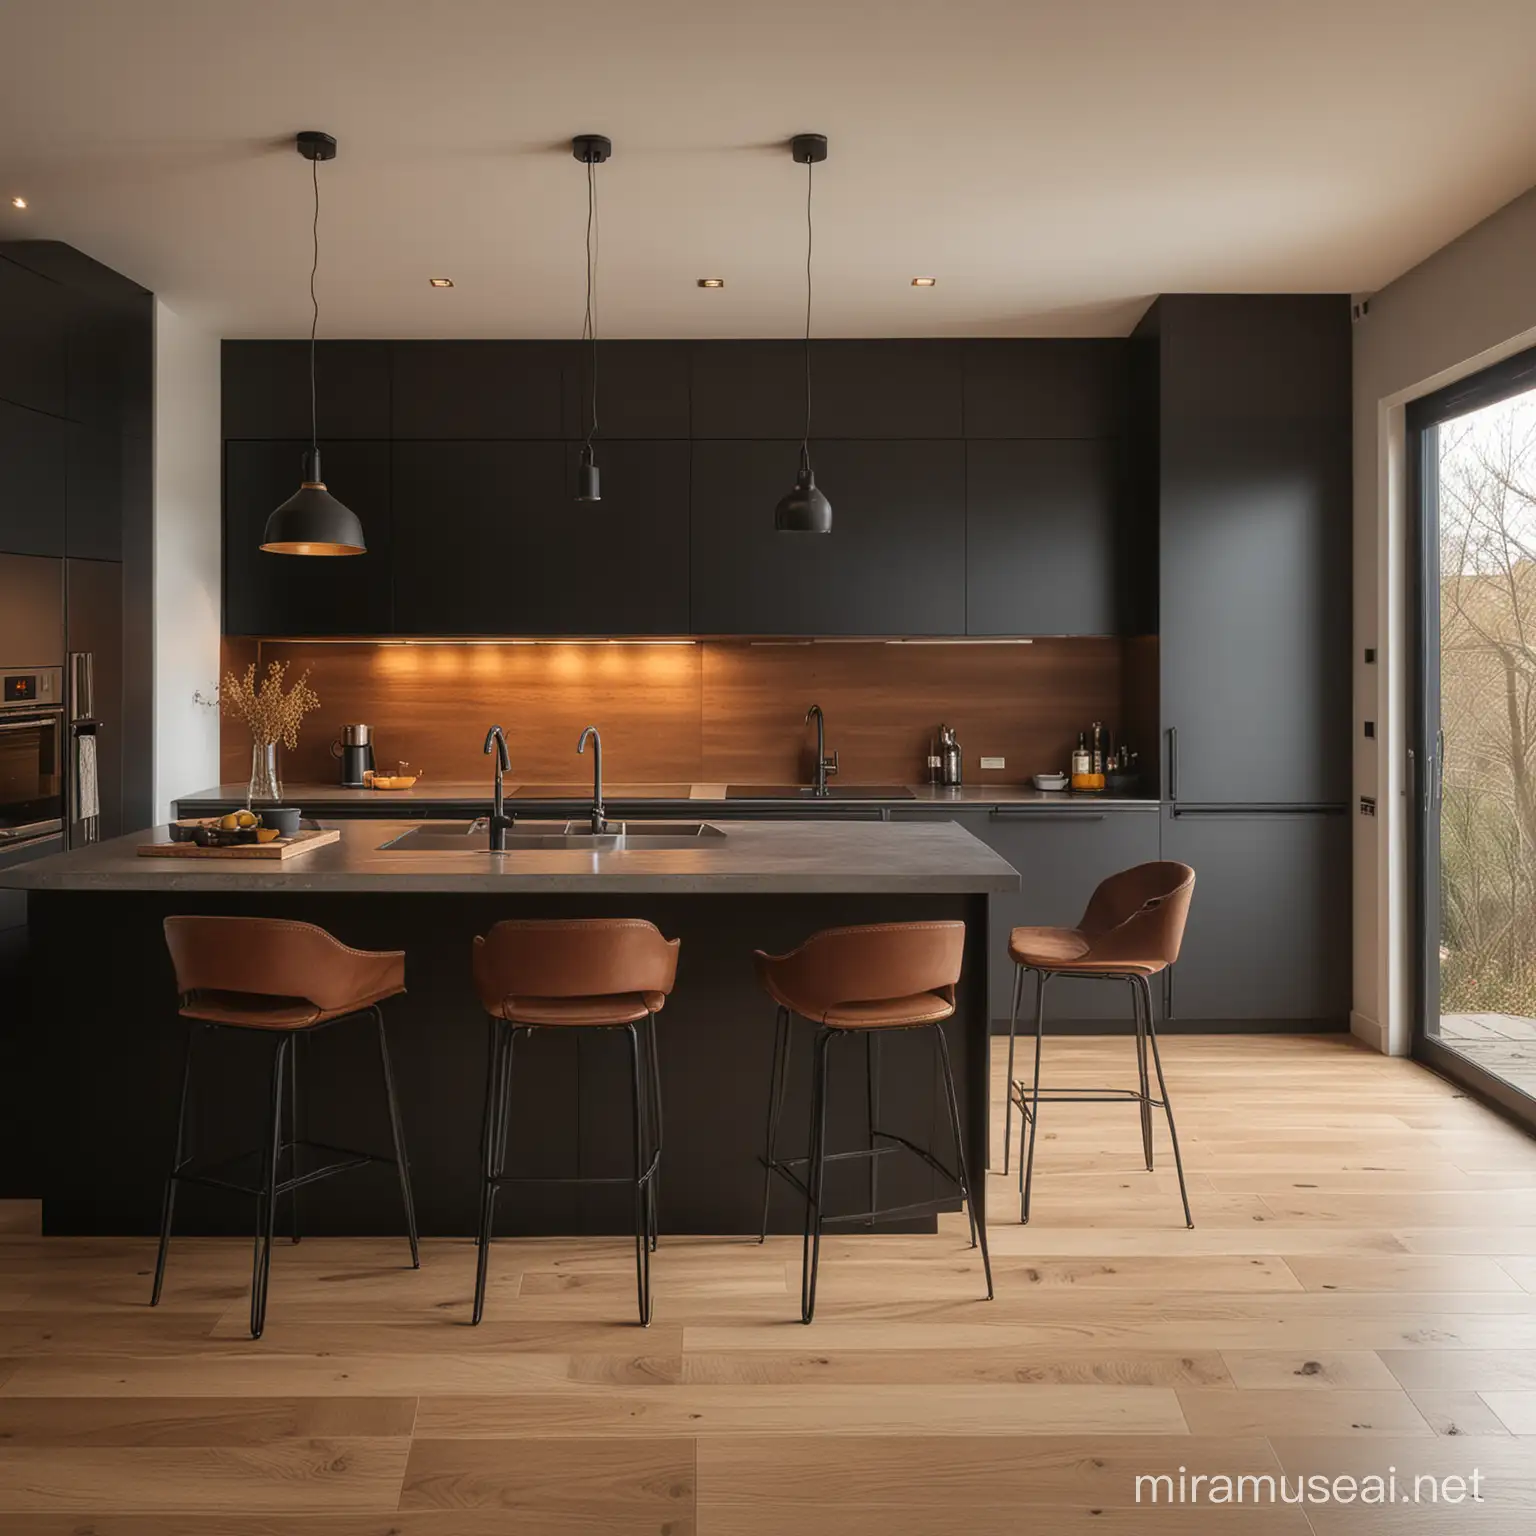 Modern Kitchen Interior with Warm Lighting in Black Brown and Grey Tones